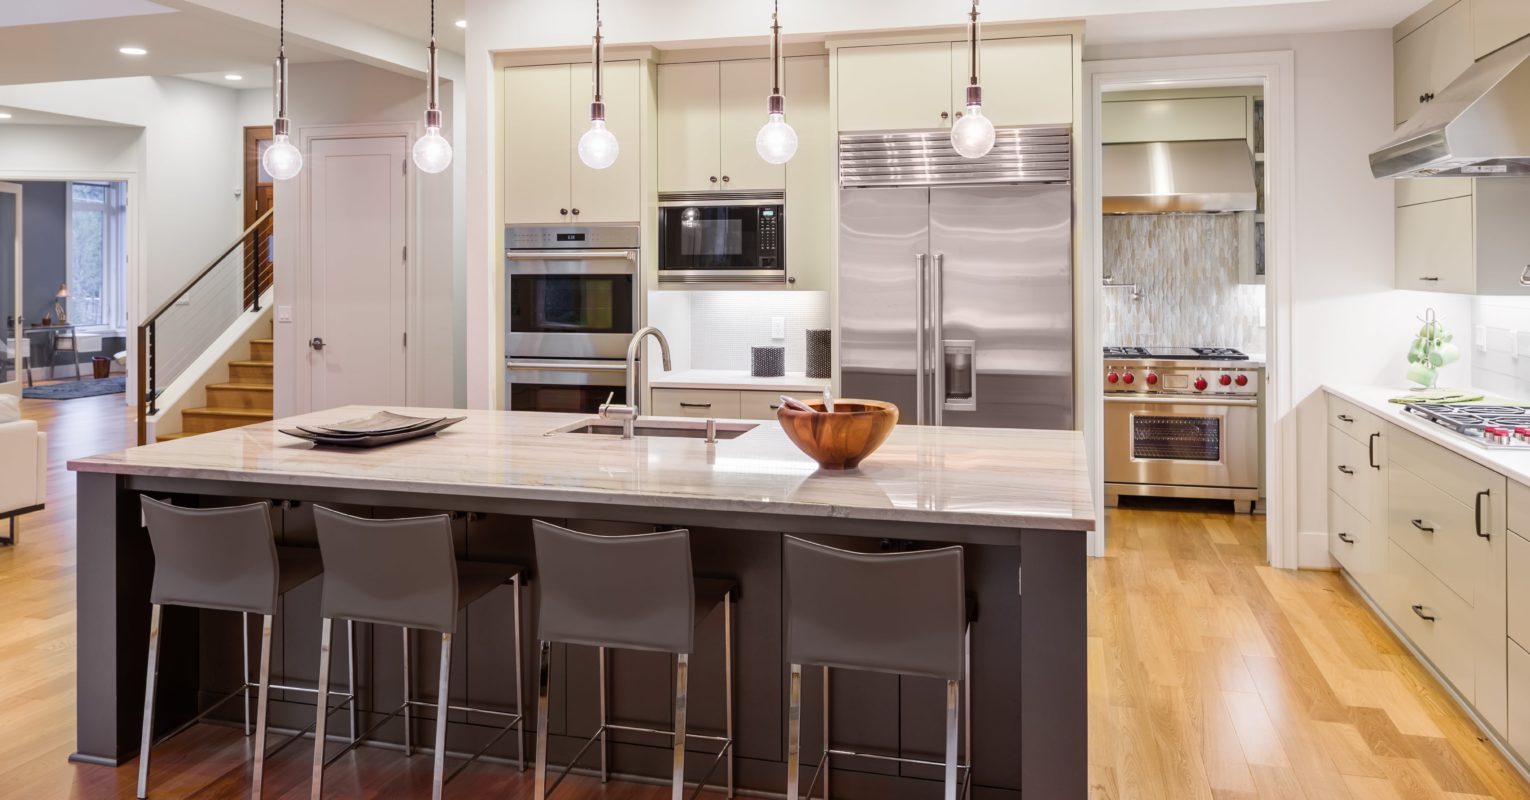 What materials are best for kitchen countertops